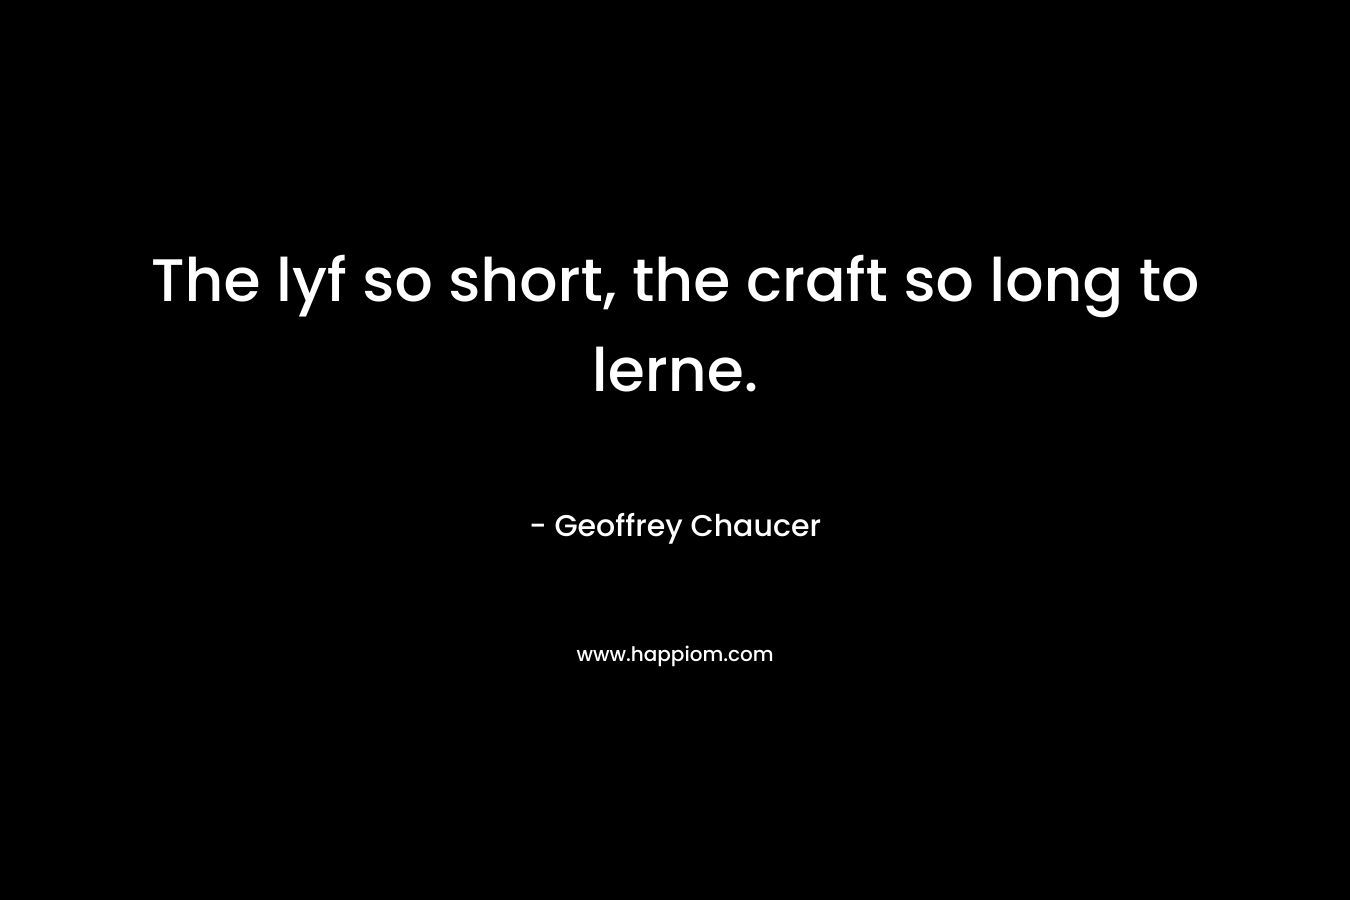 The lyf so short, the craft so long to lerne.